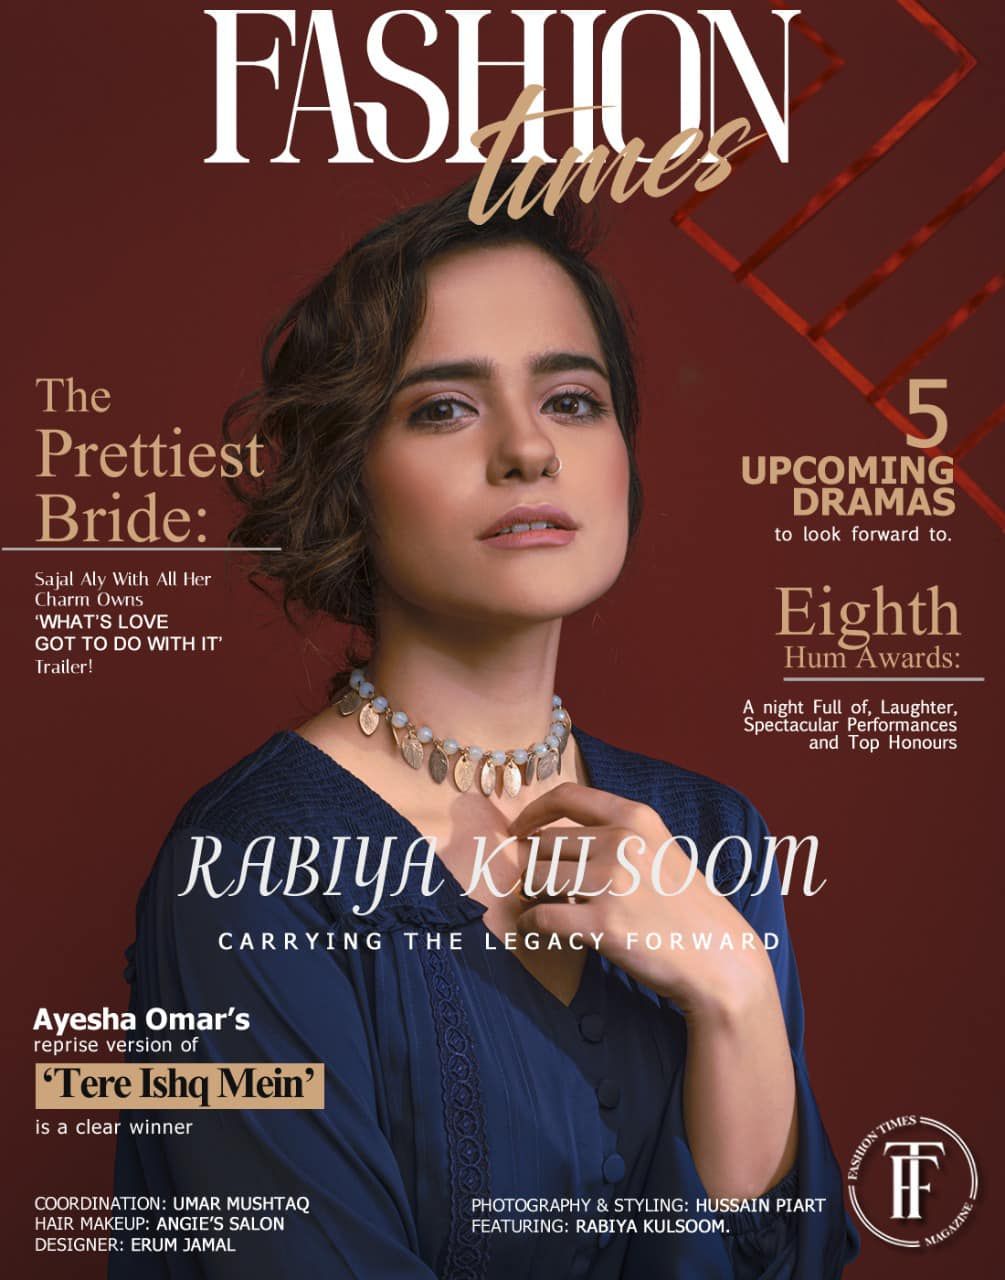 Rabya was featured on the Fashion Times cover